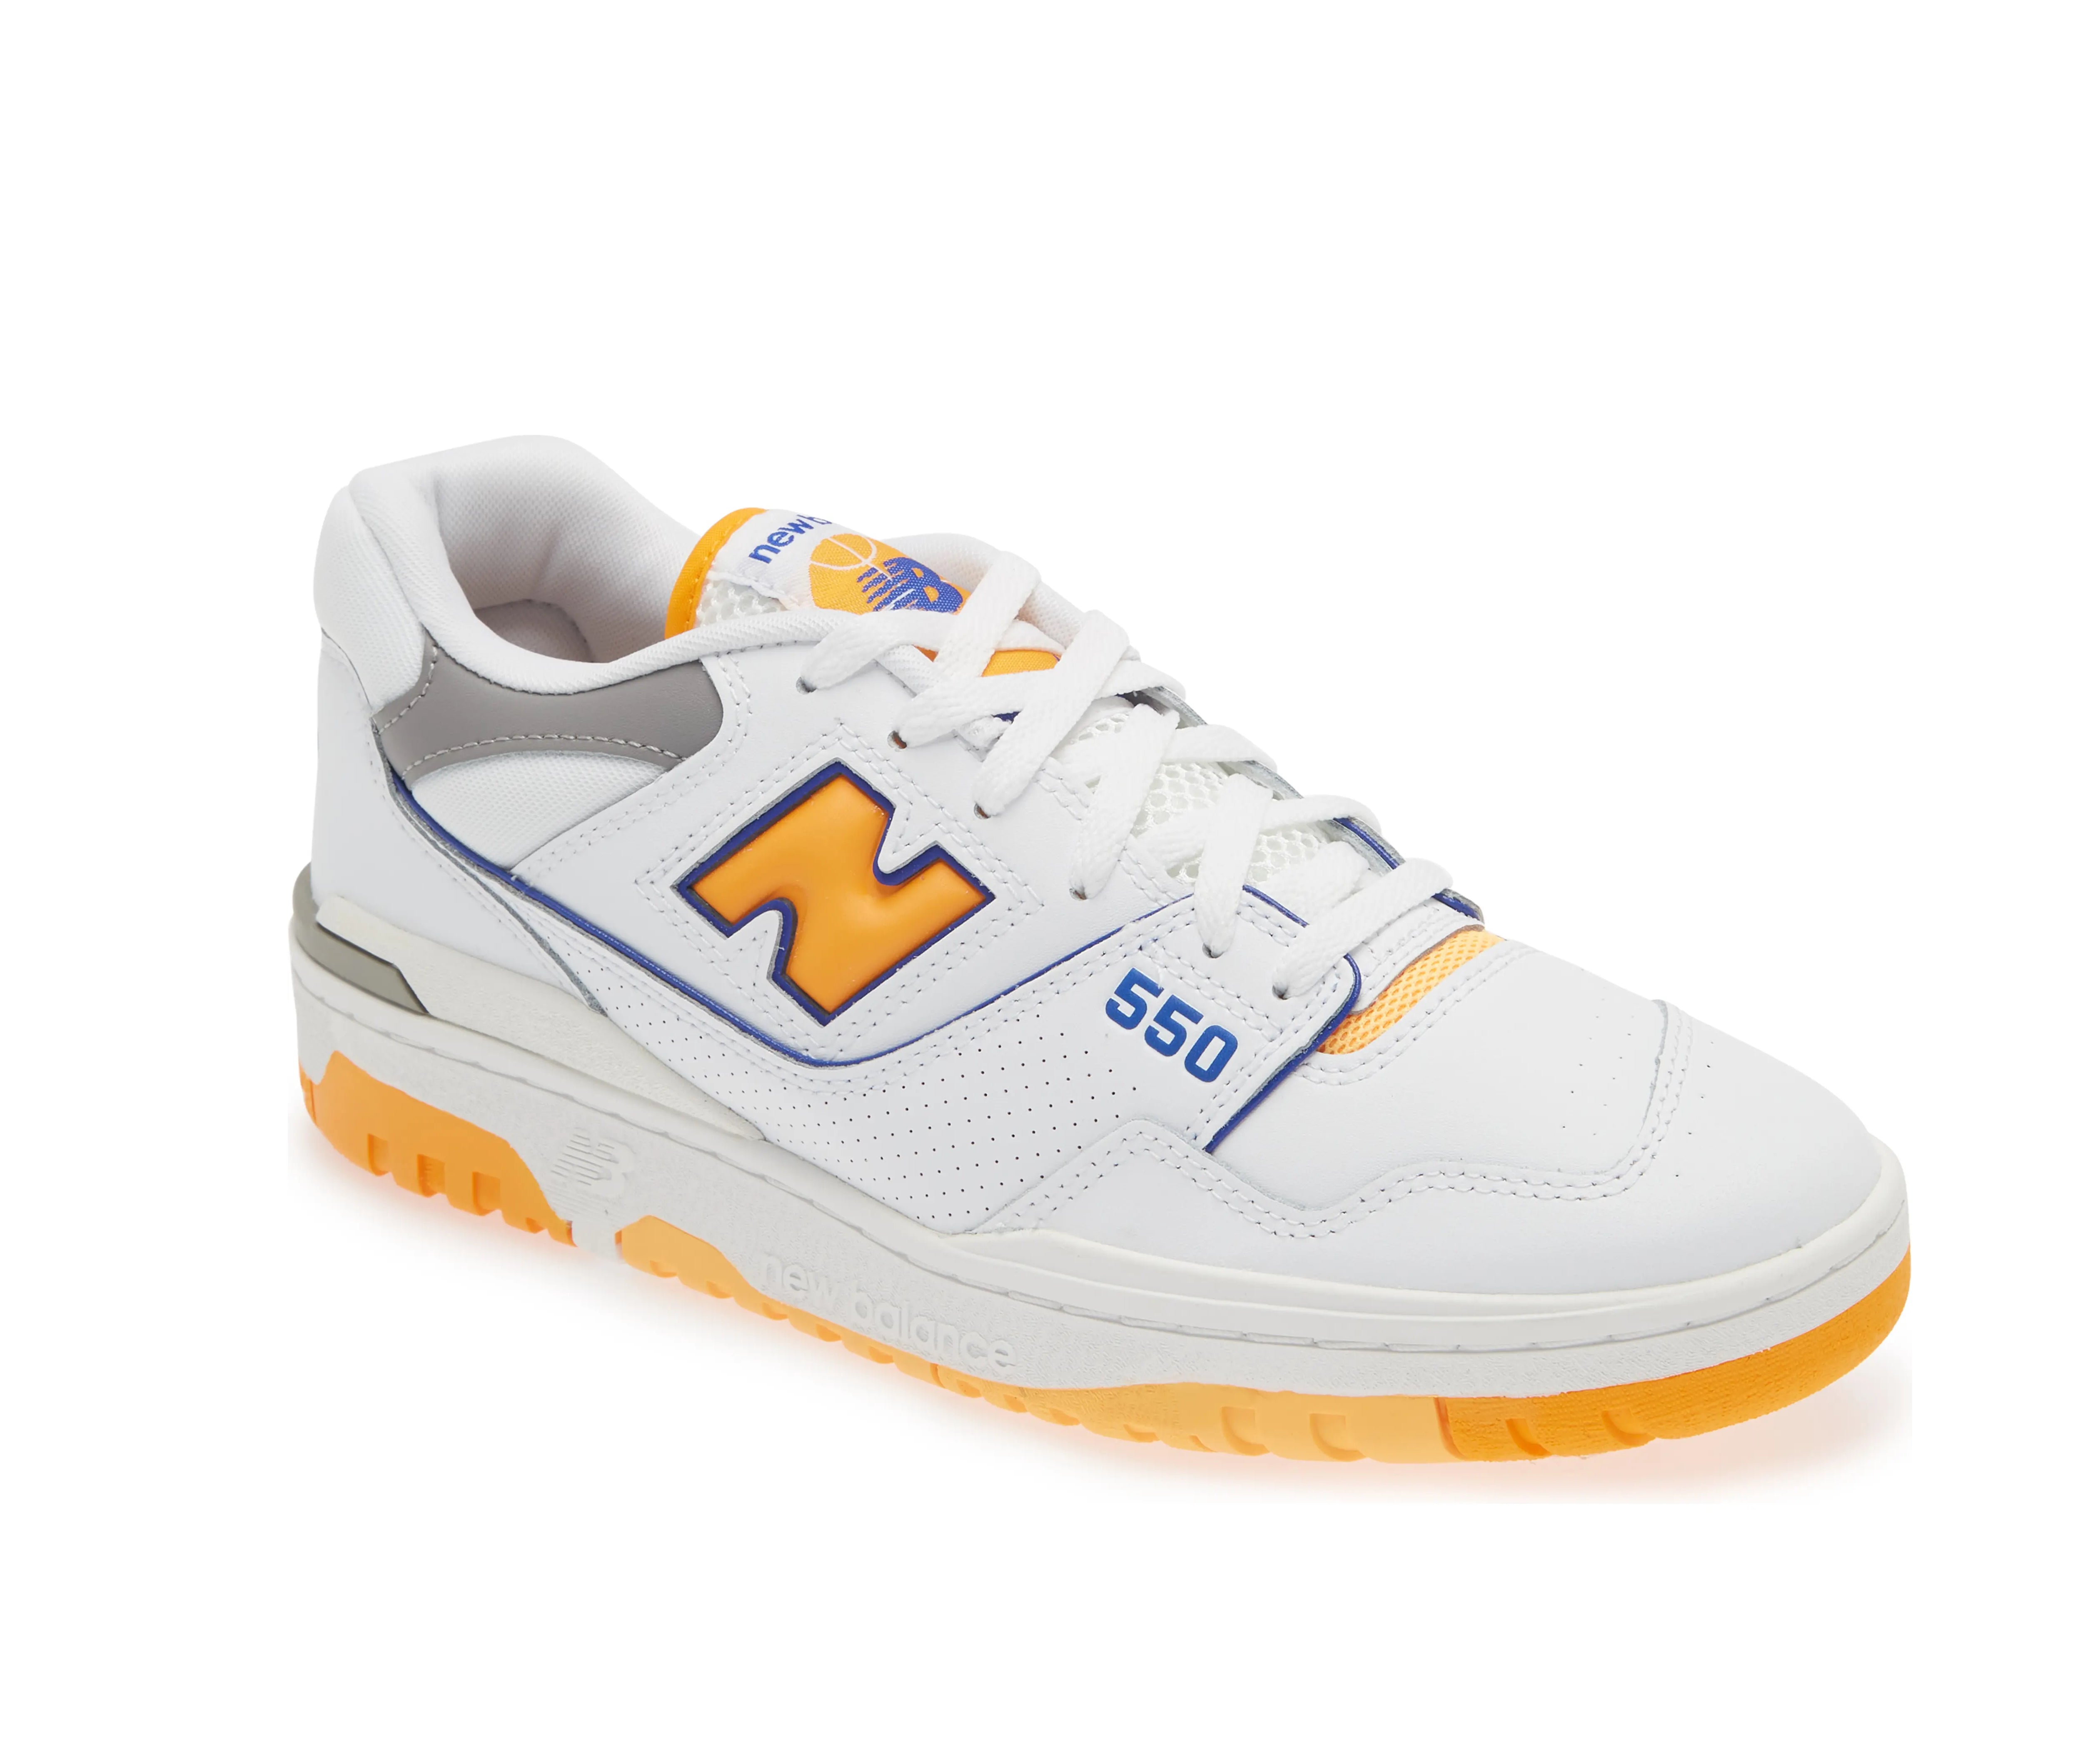 A white leather New Balance basketball shoe with orange and indigo accents.